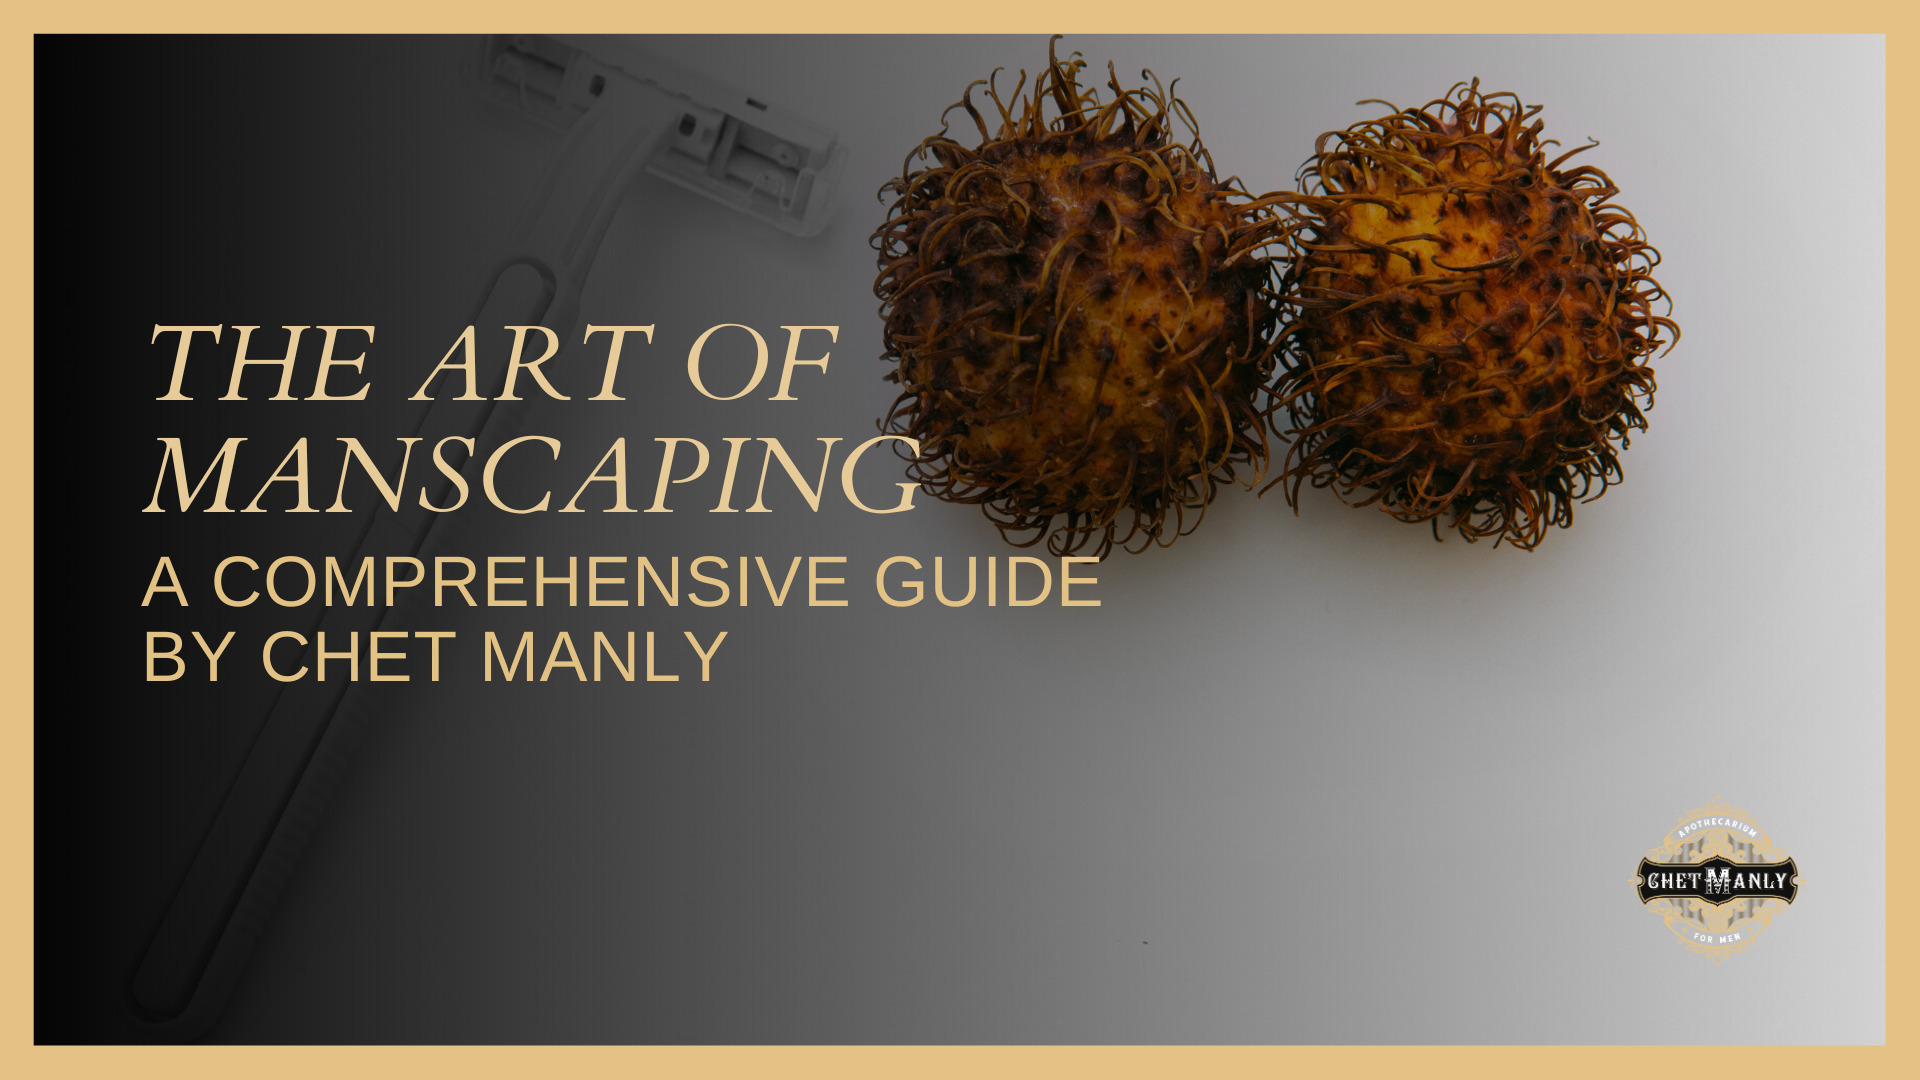 The Art of Manscaping: A Comprehensive Guide by Chet Manly